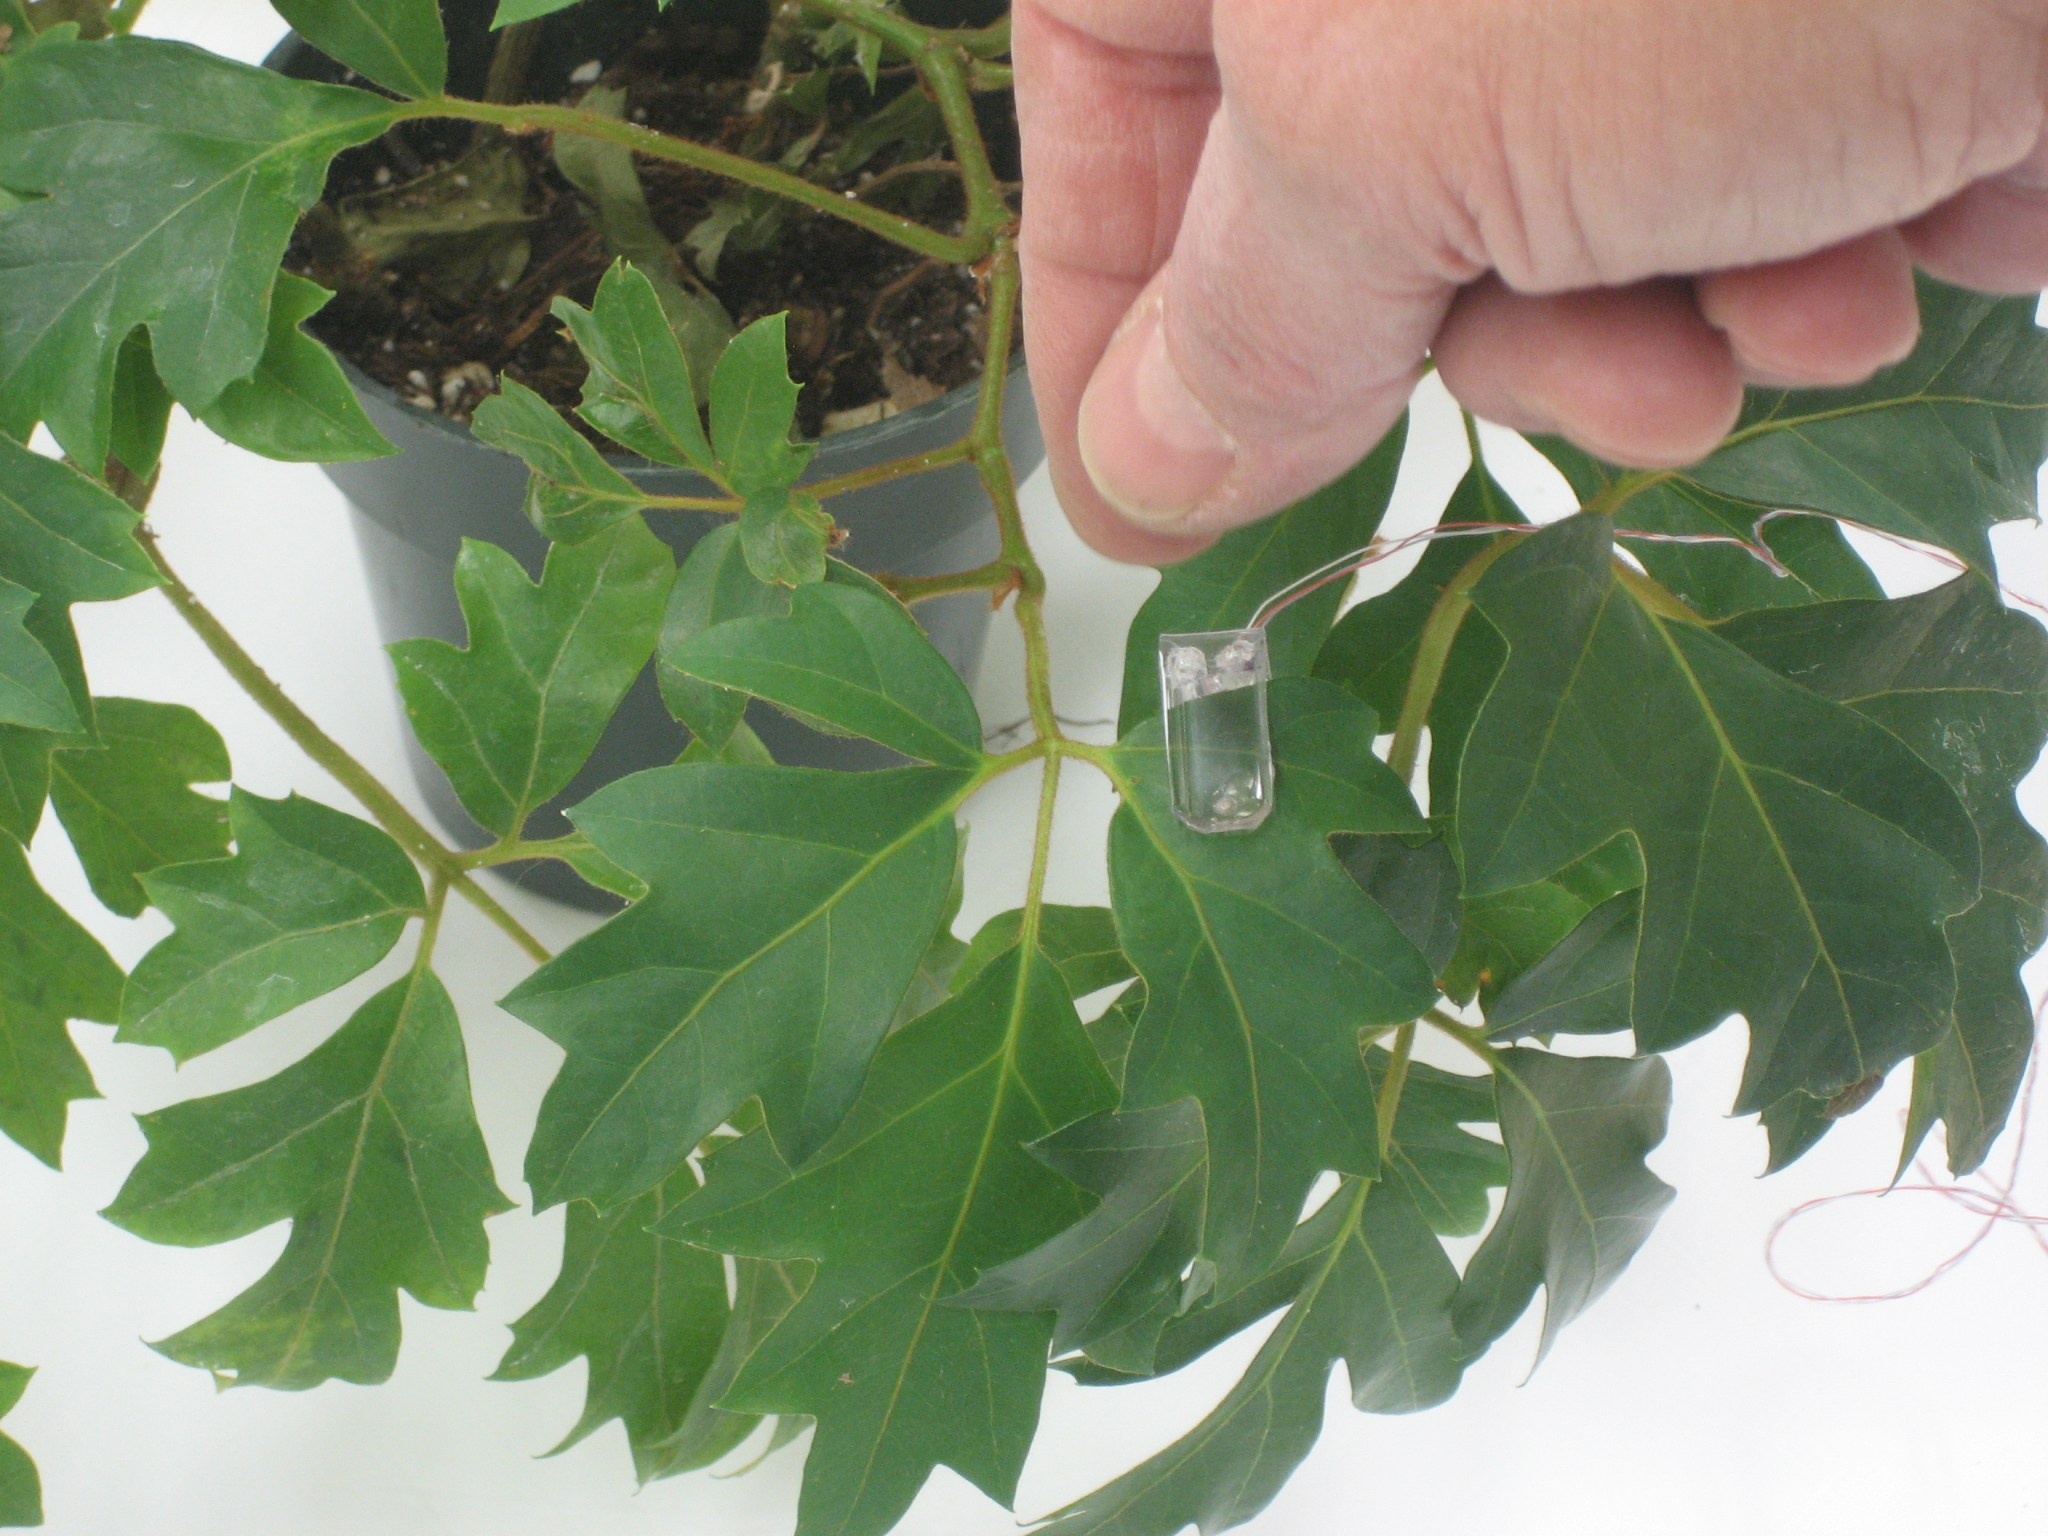 Measuring leaf thickness